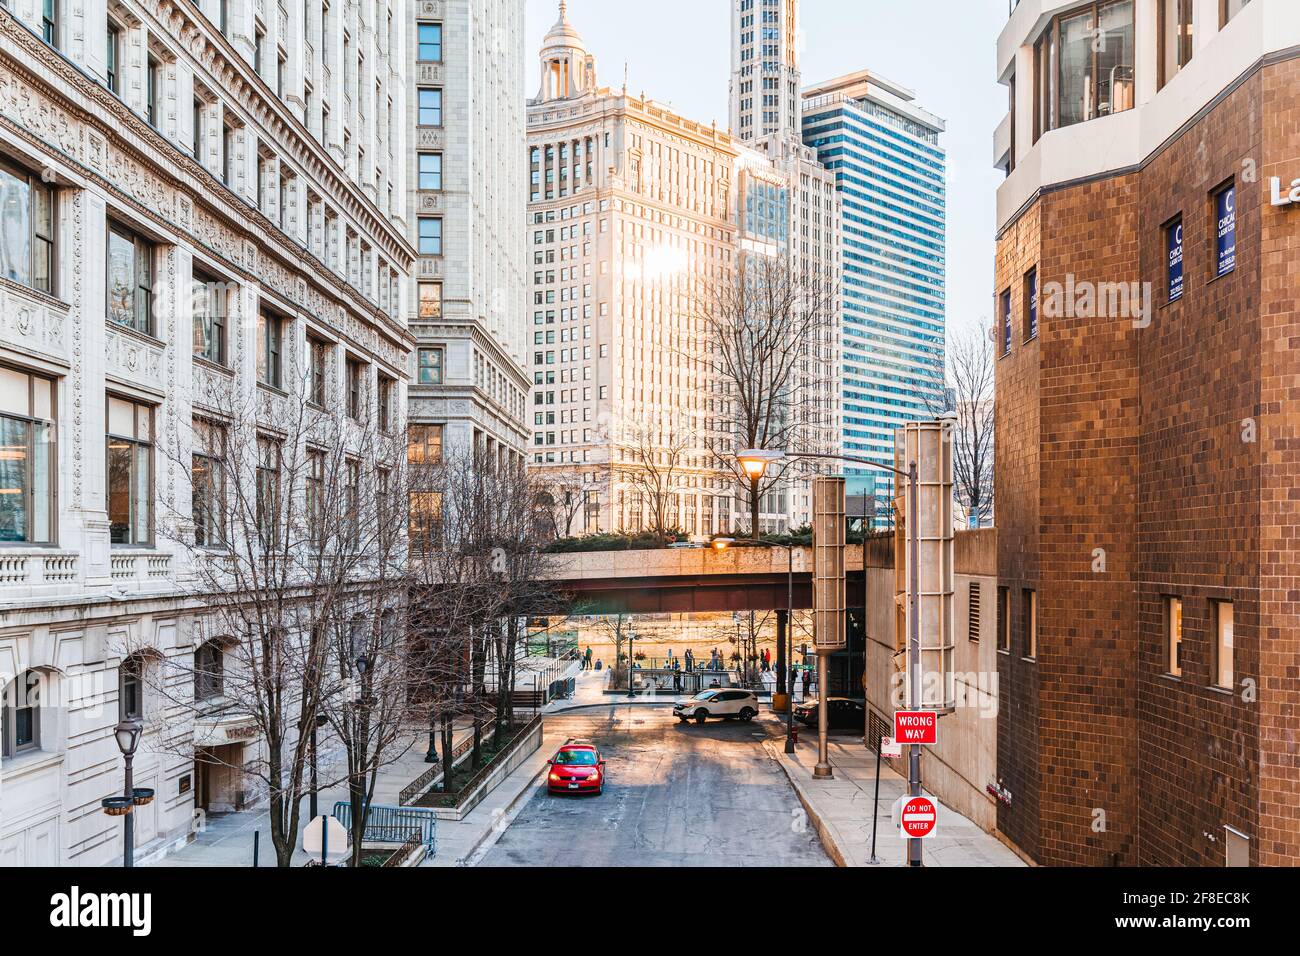 Chicago, Illinois - March 13, 2021: The Empty Streets of Downtown Chicago During the COVID-19 Pandemic. Stock Photo